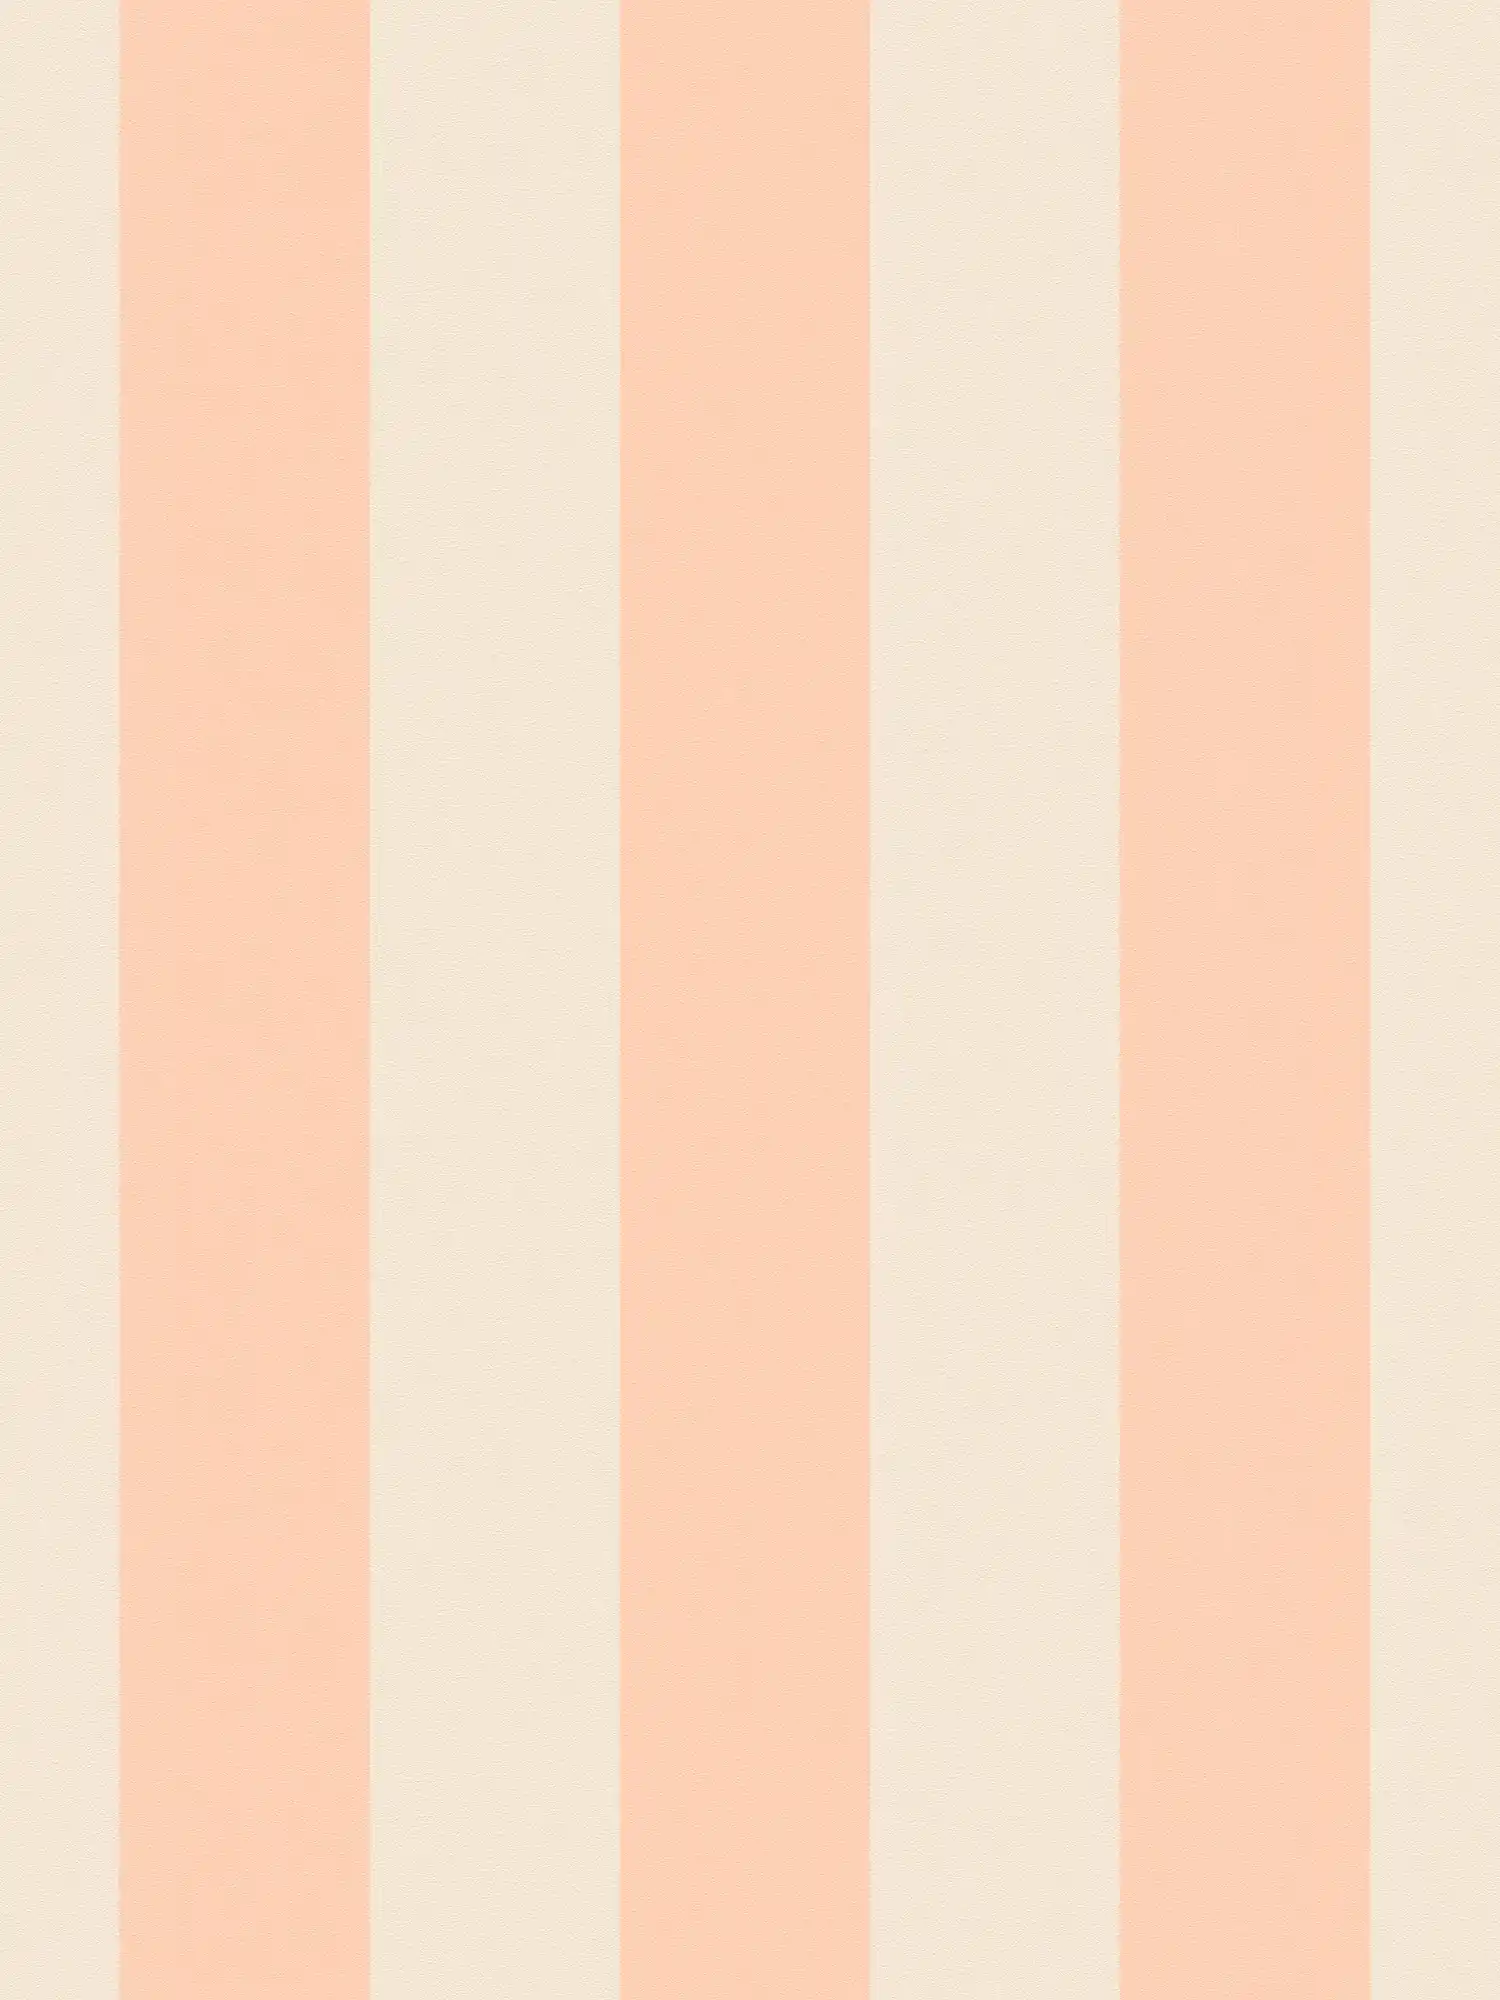         Non-woven wallpaper with block stripes in soft shades - cream, pink
    